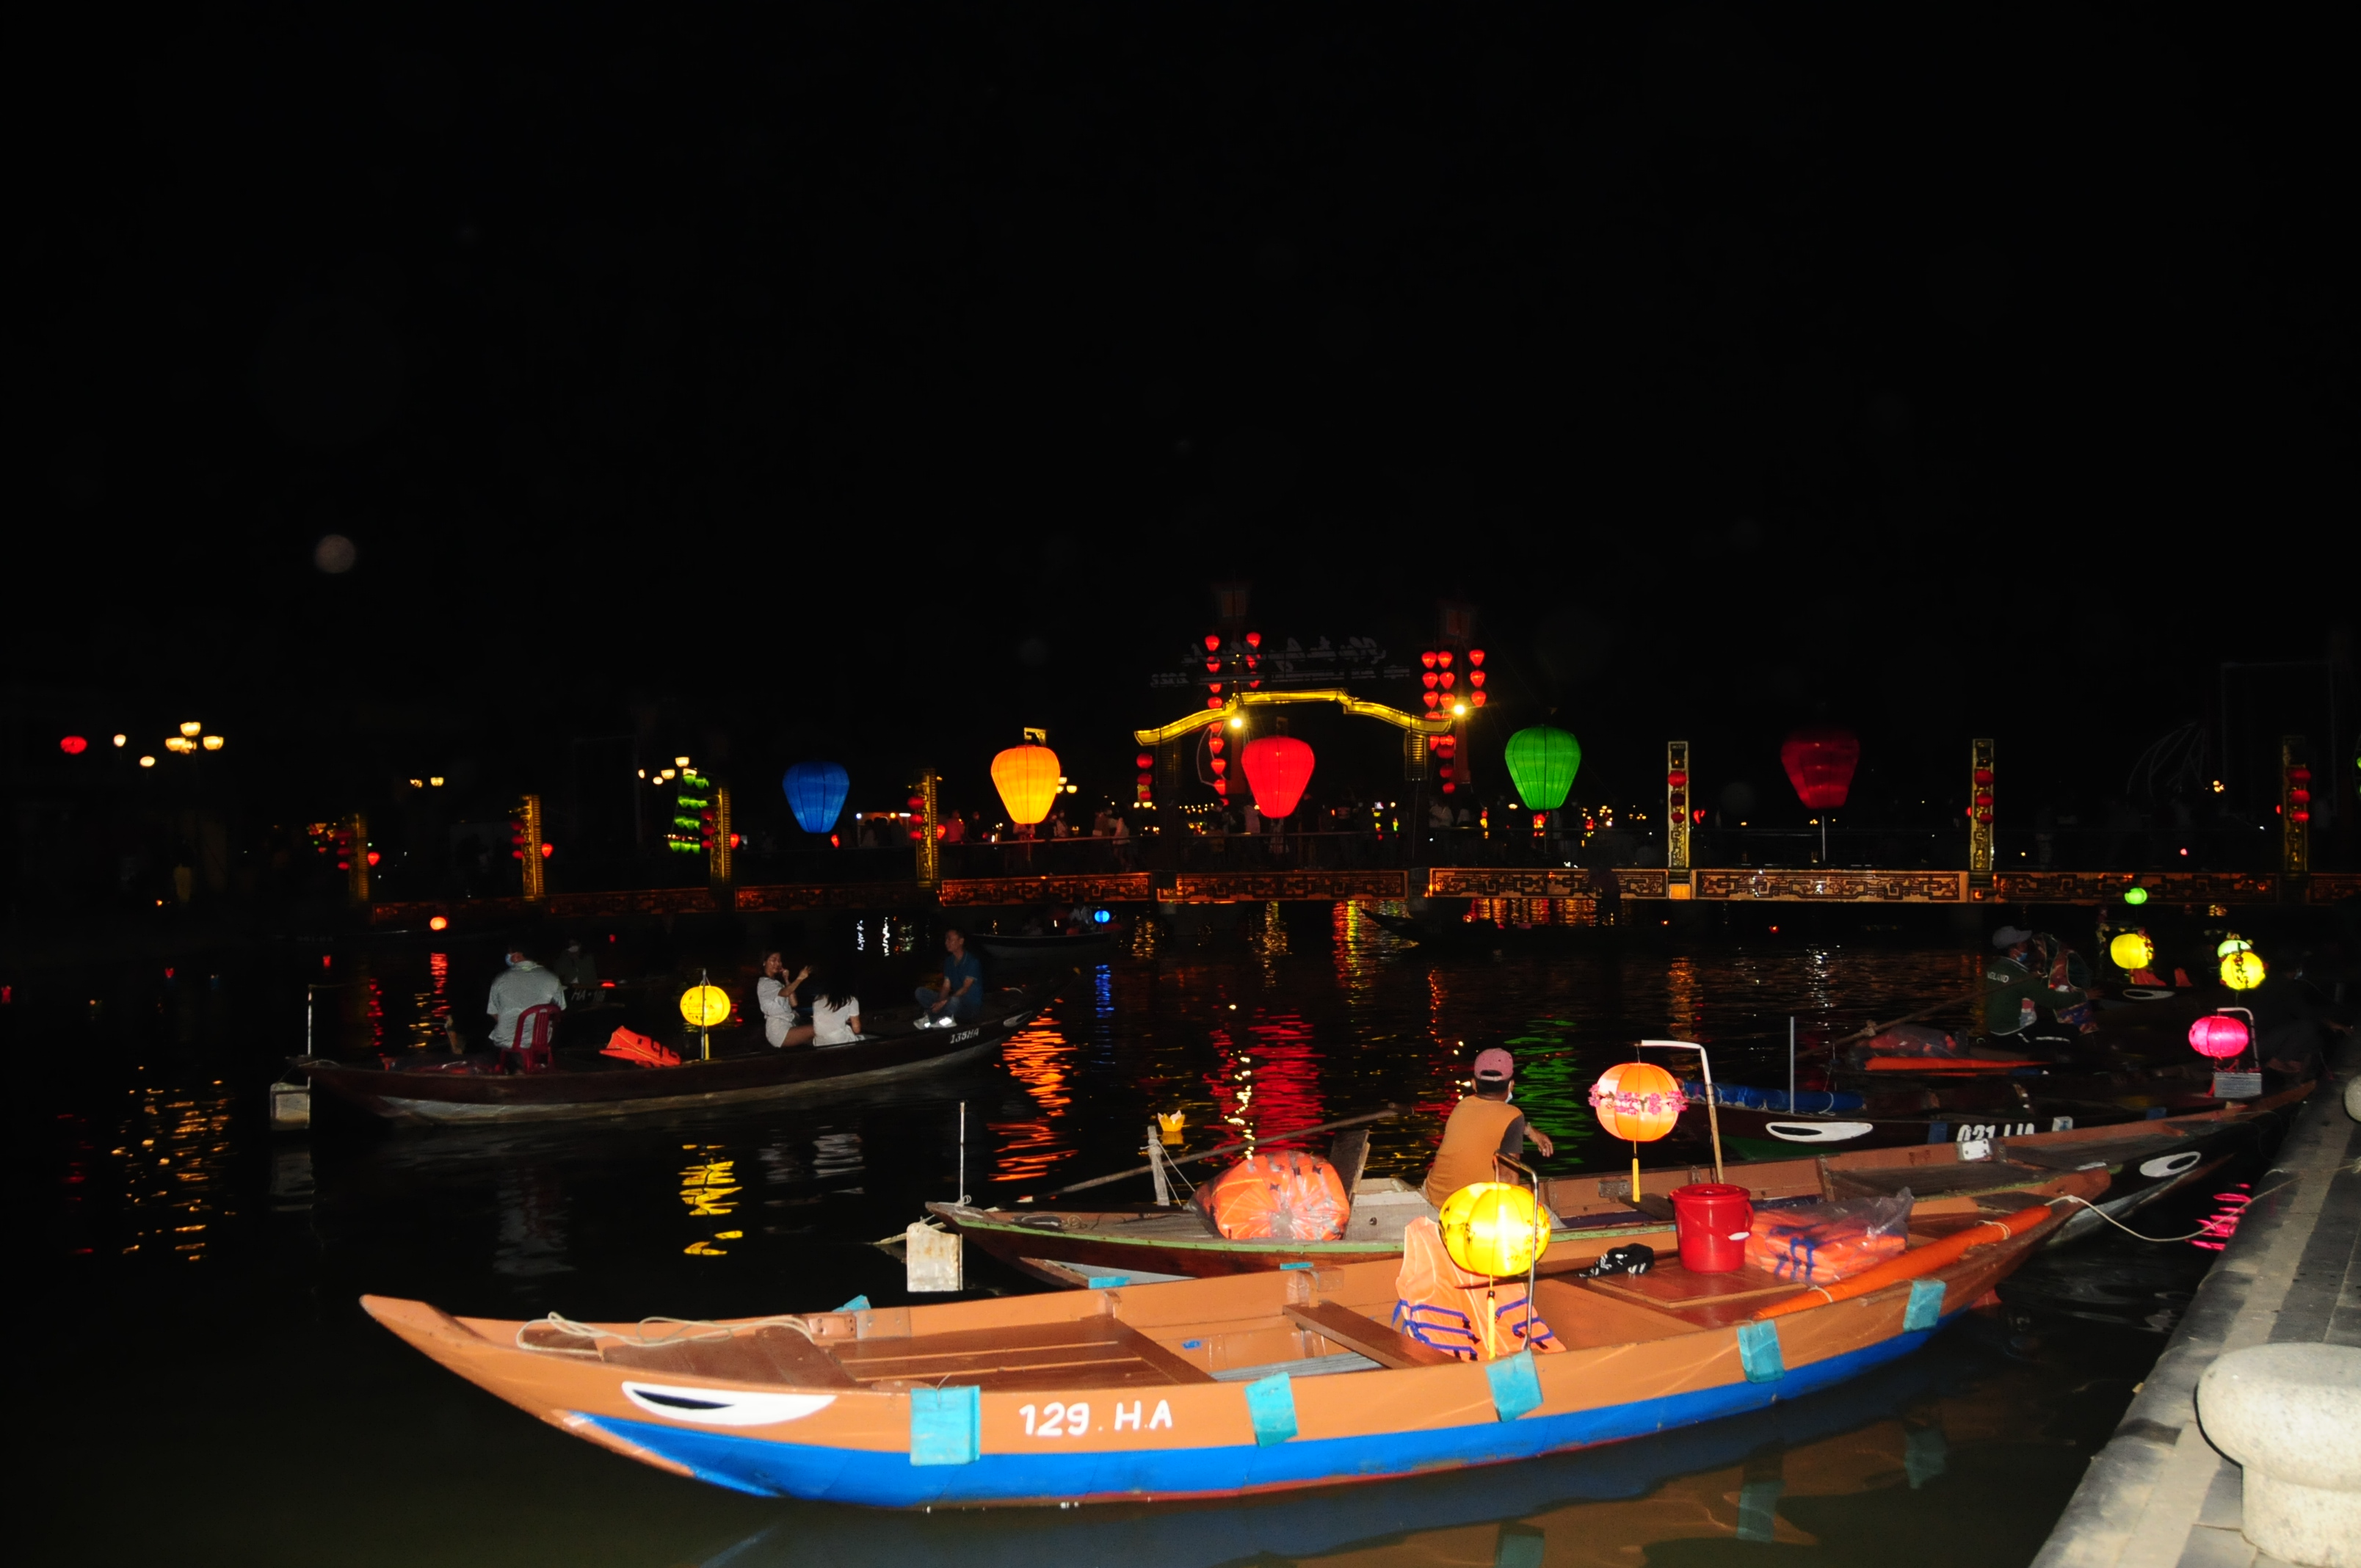 Visitors enjoy sightseeing on a boat in Hoi An City, Quang Nam Province, December 24, 2021. Photo: B.D. / Tuoi Tre